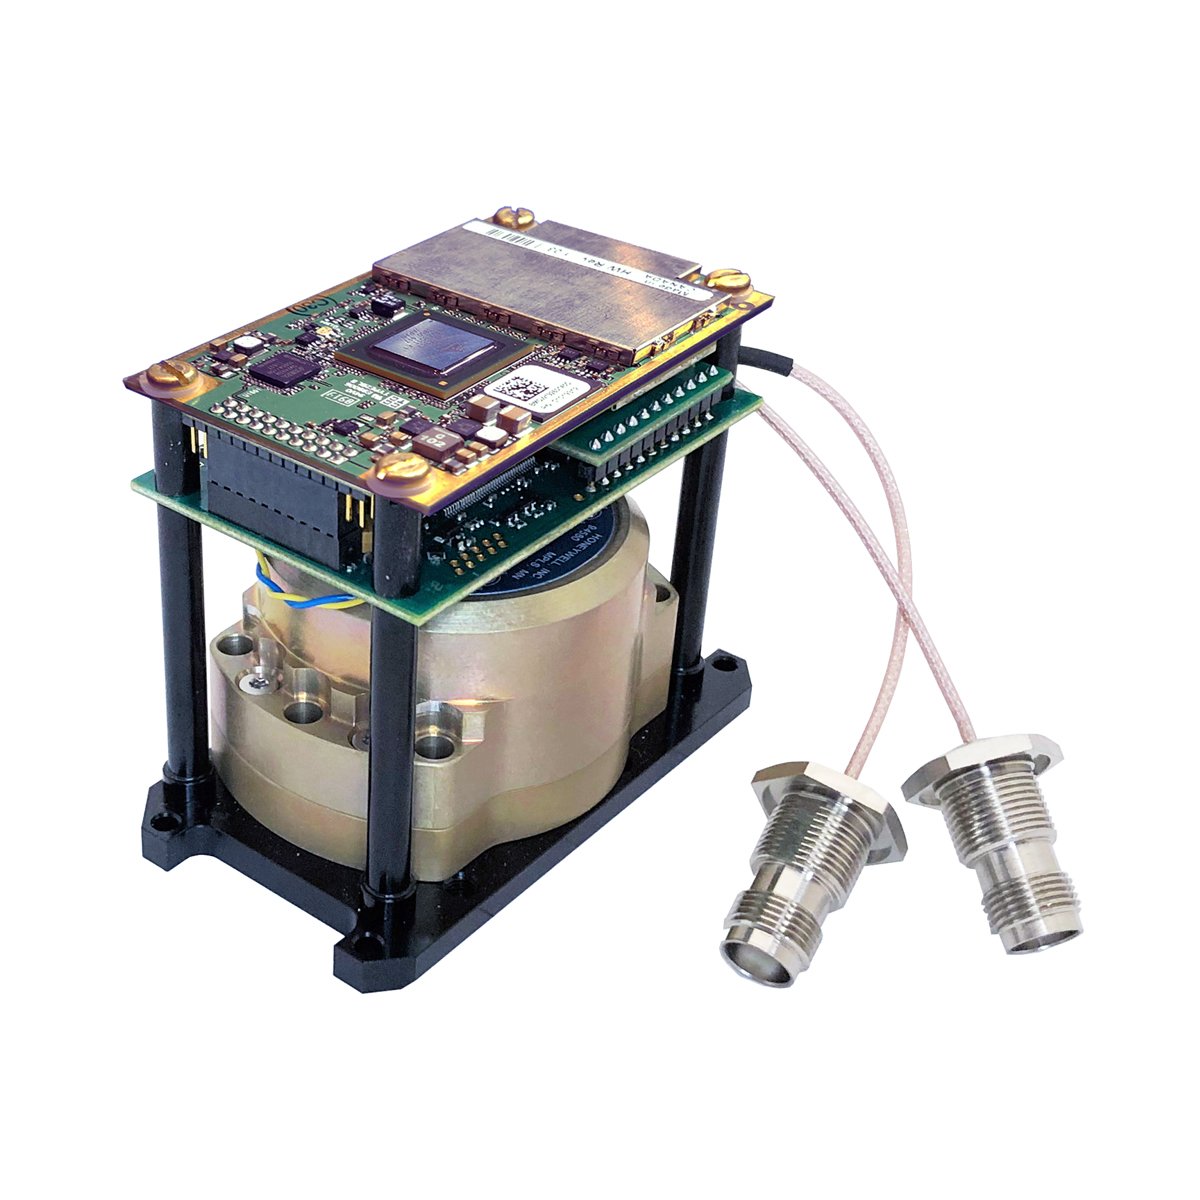 INS-DH-OEM — Dual Antenna, GPS-Aided Inertial Navigation System with Honeywell HG4930 IMU and NovAte